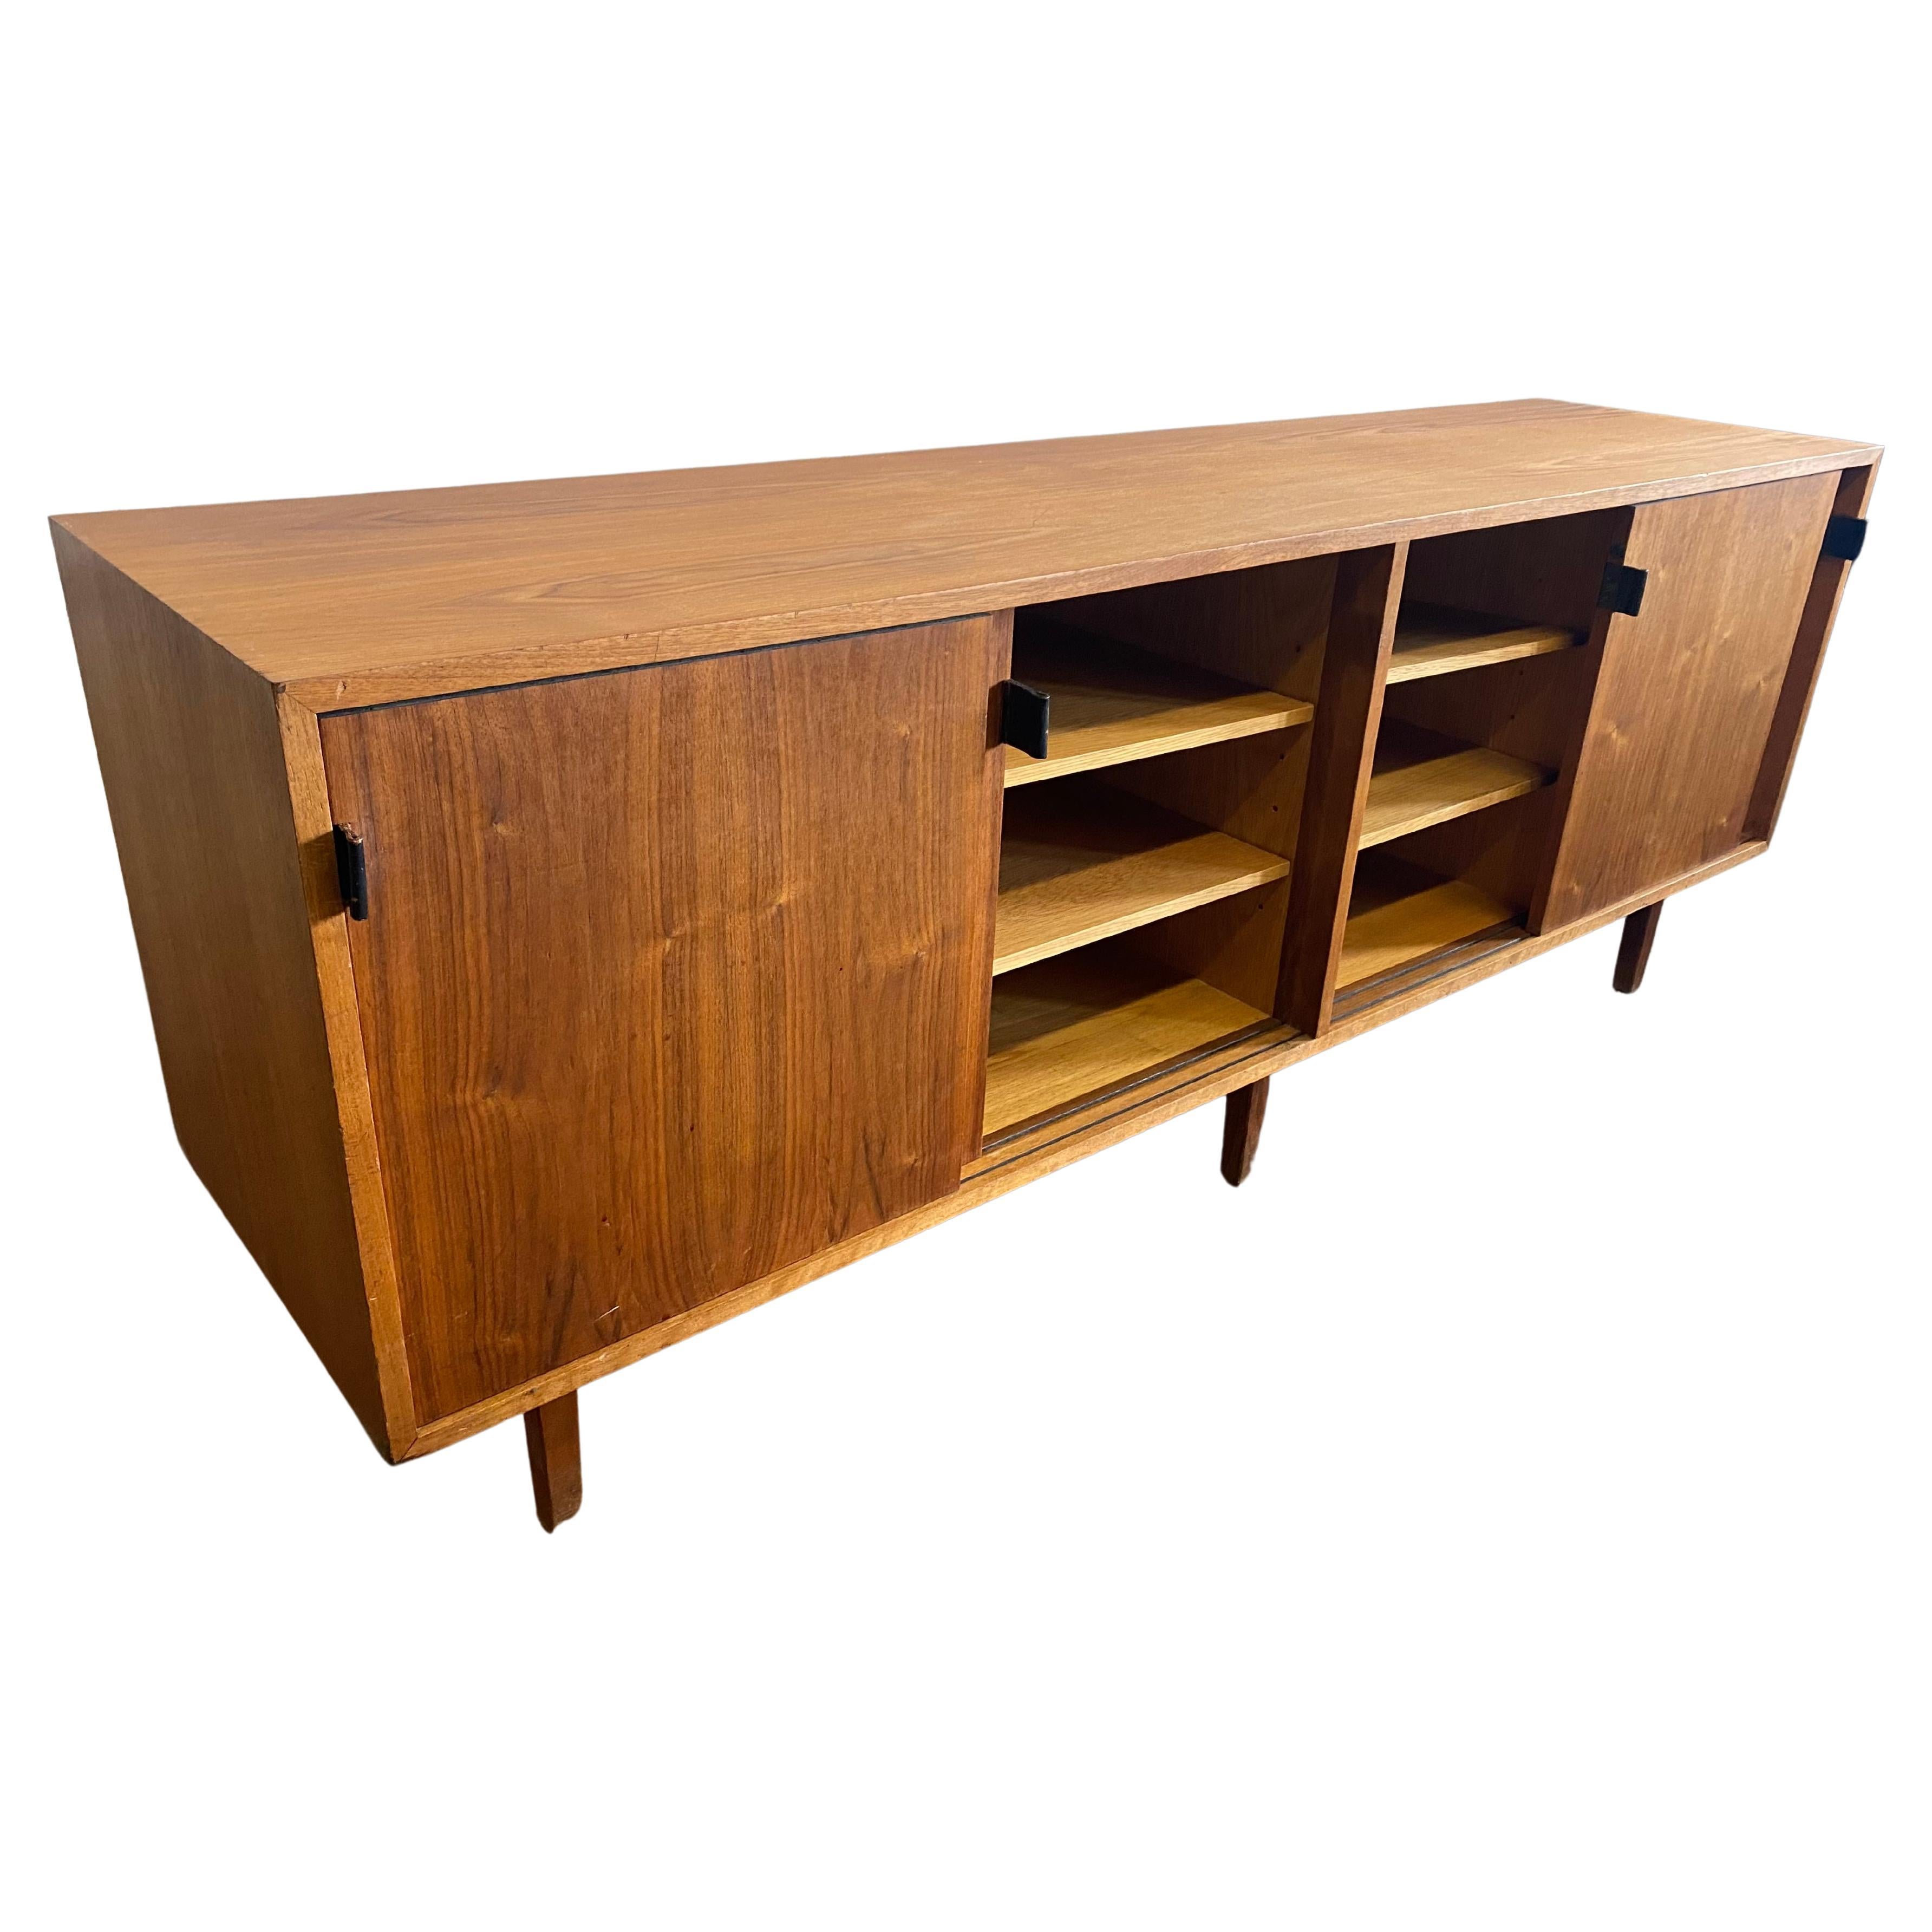 Classic Modernist Florence Knoll Walnut and Oak Credenza, Early Knoll Label